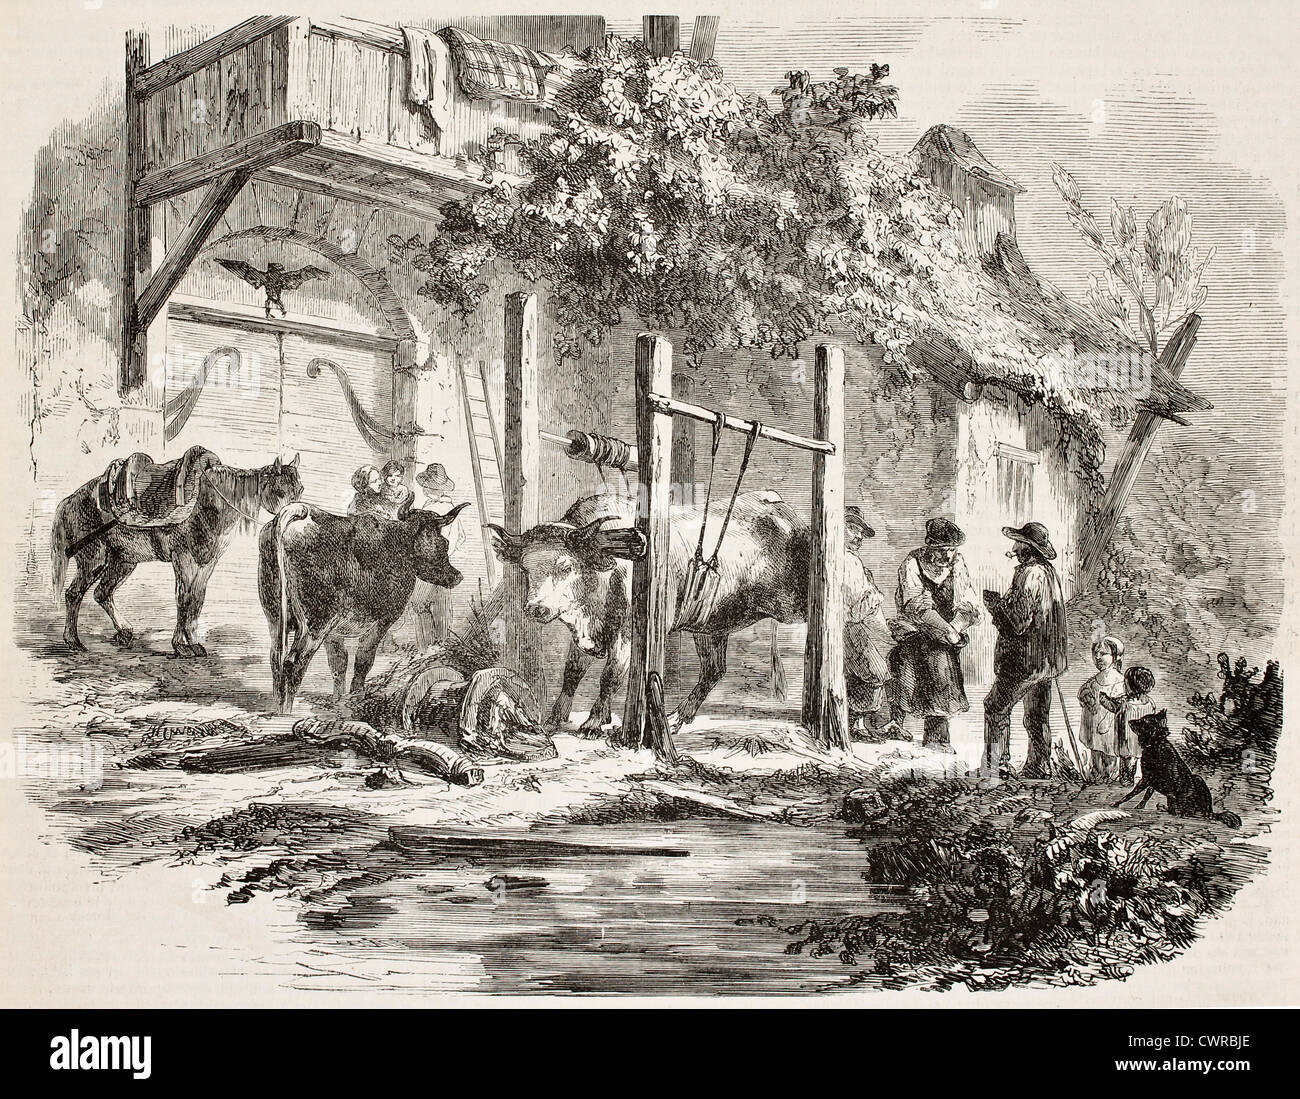 Farmers shoeing oxen old illustration Stock Photo